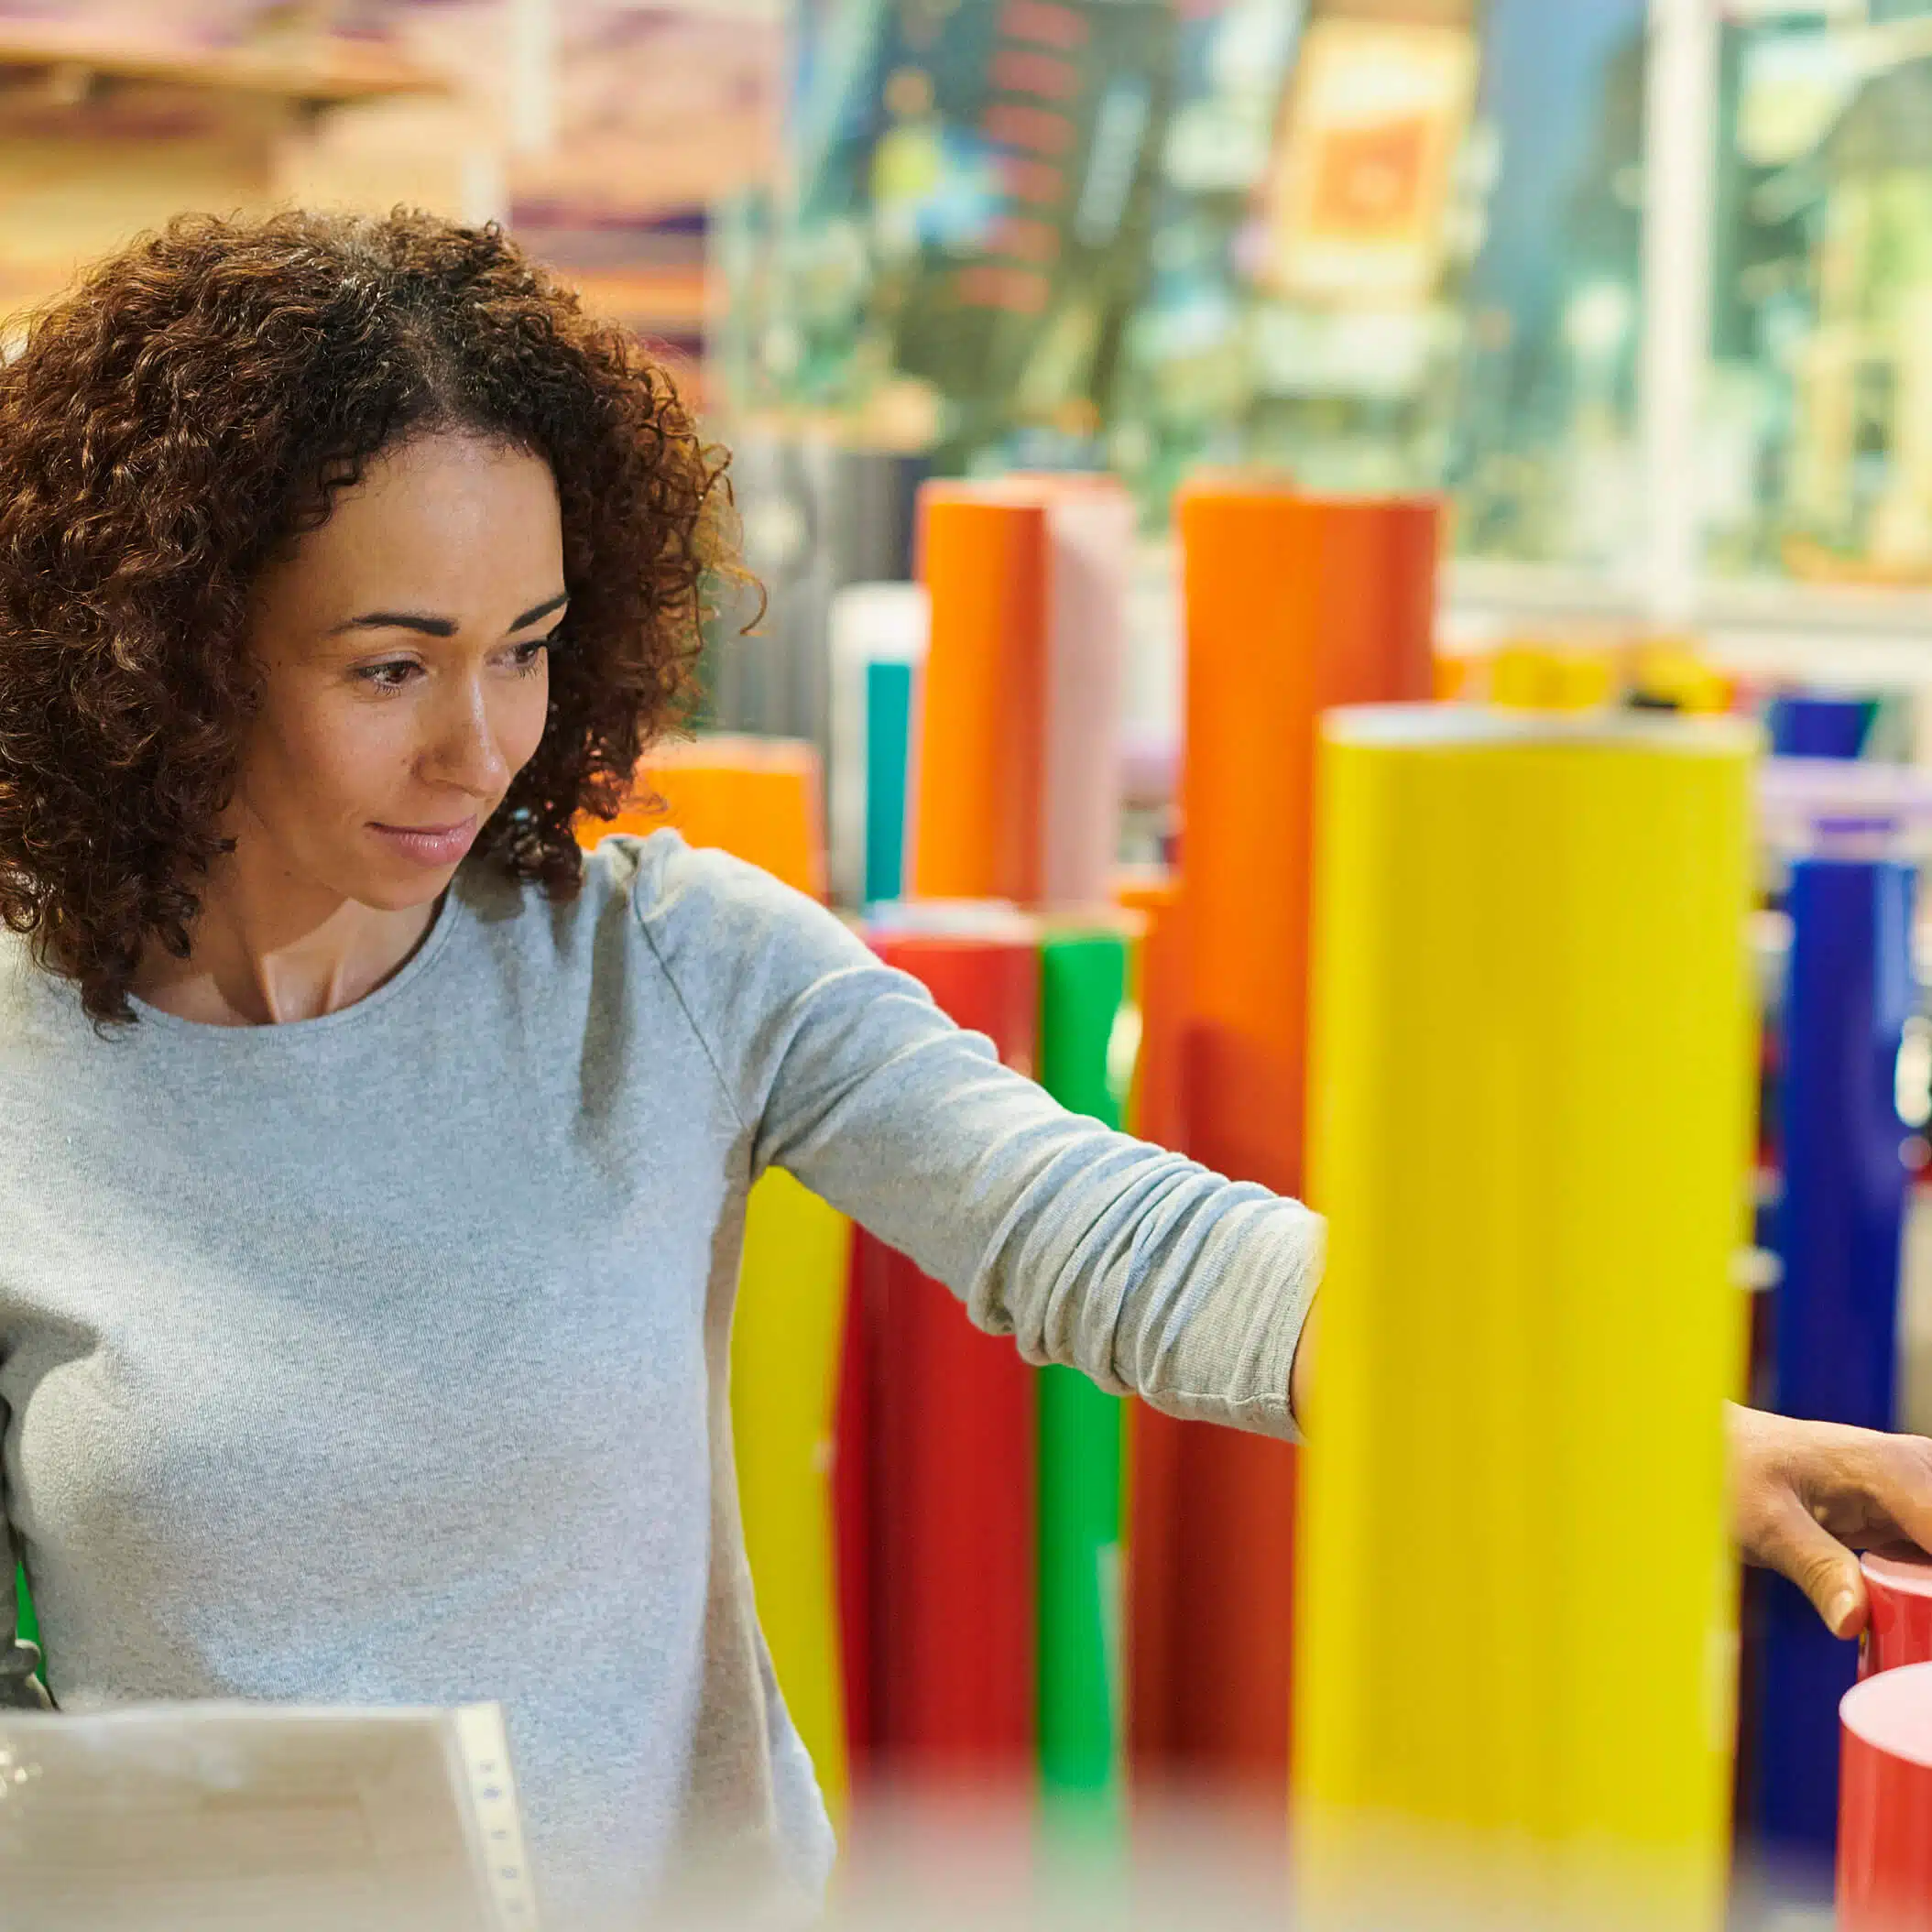 zensmart is showing A woman with curly hair, in a gray long-sleeve shirt, is selecting a colorful roll of material from an array of vibrant rolls meant for signage. She is in a brightly lit store with various colorful rolls around her. The background is slightly blurred. with print workflow automation